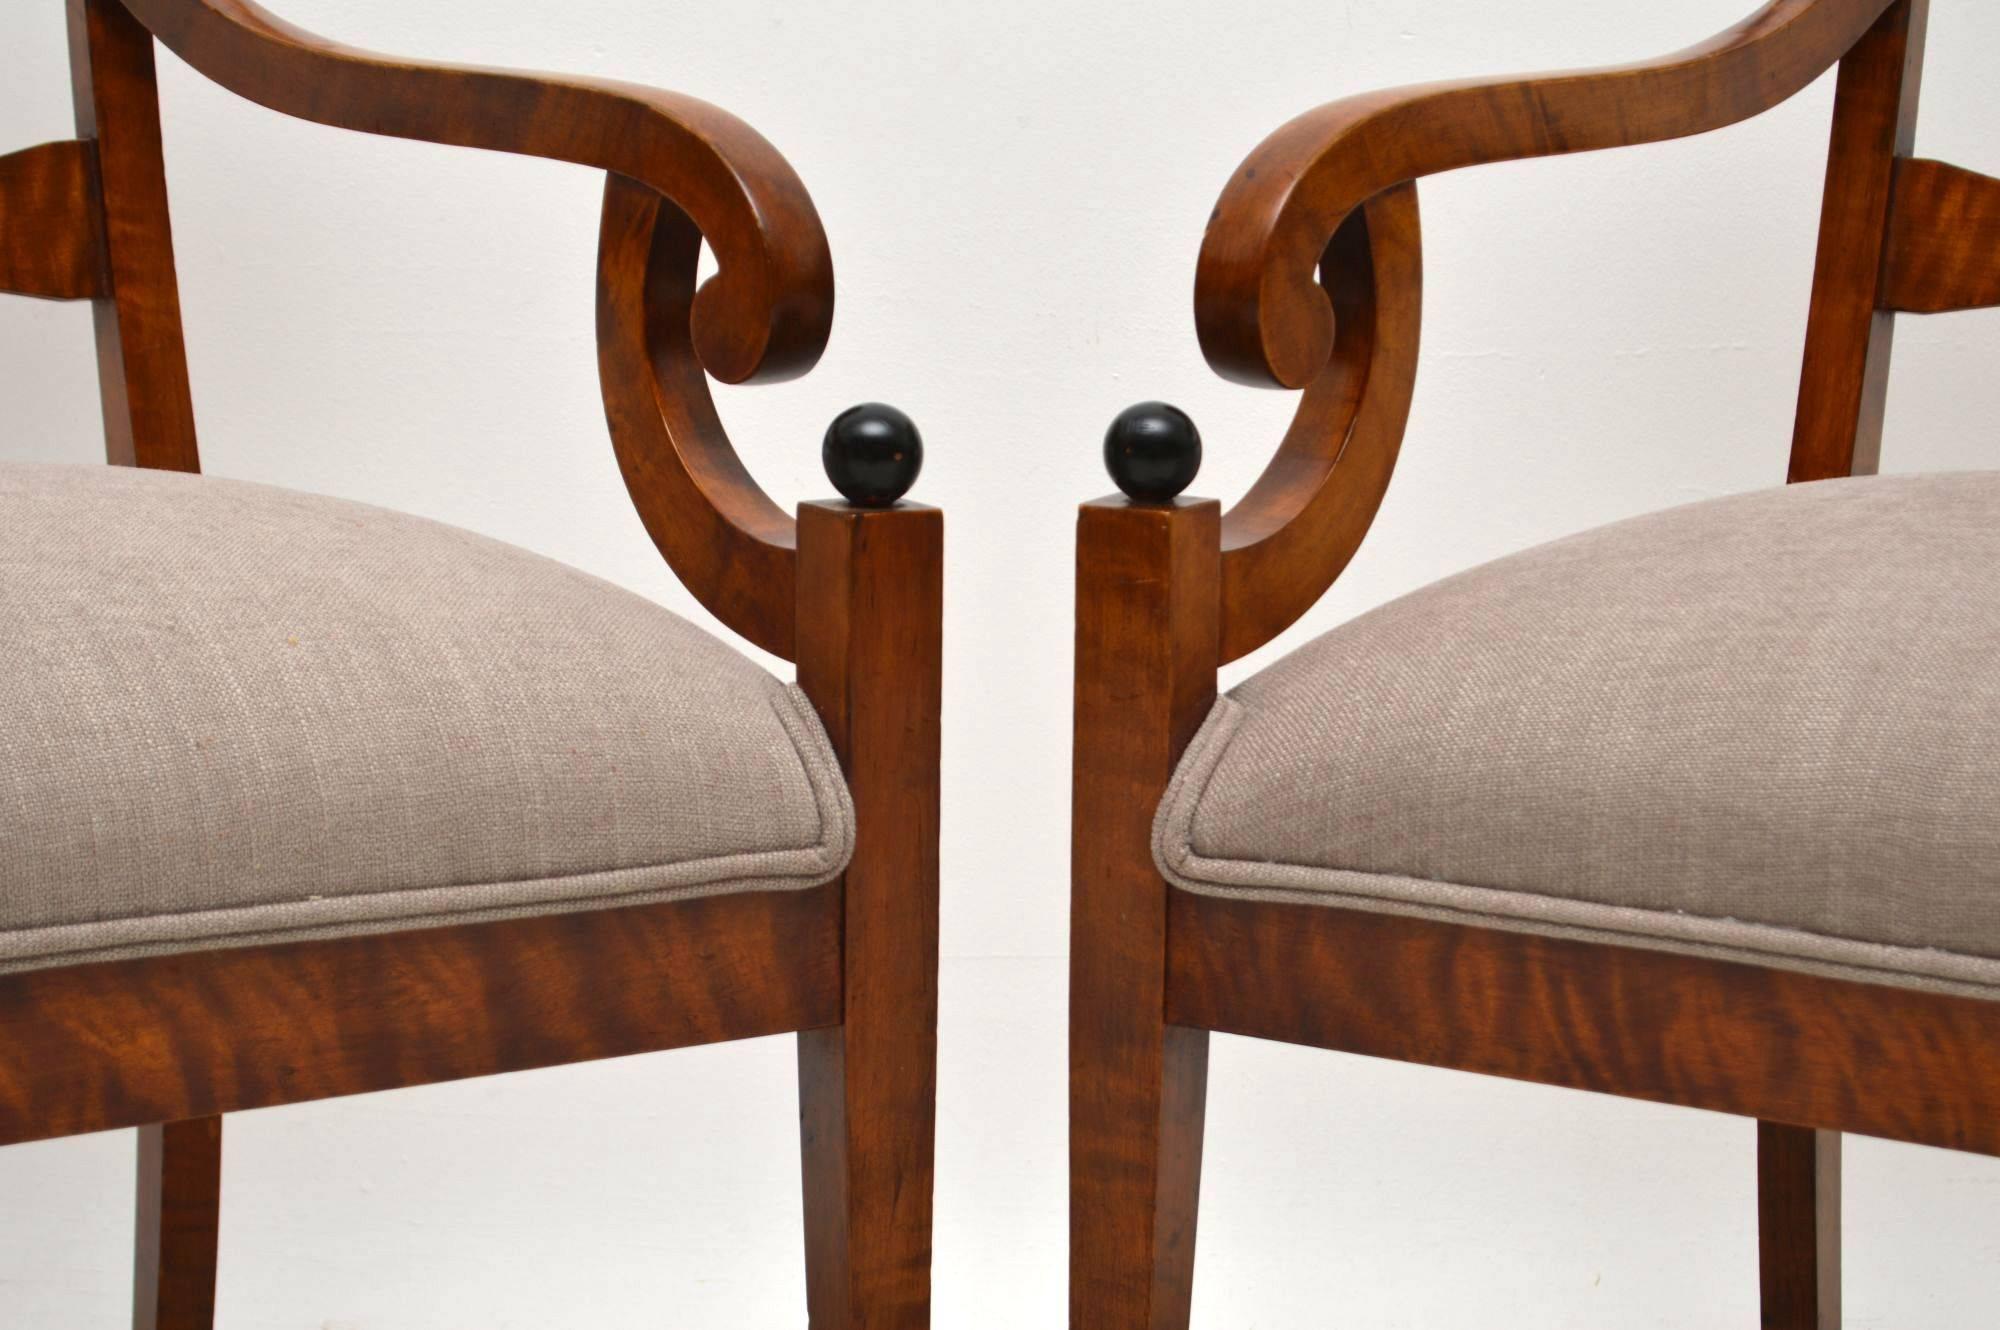 Stylish pair of antique Swedish Biedermeier armchairs in satin birch and newly re-upholstered. They have bold Trafalgar backs, scroll over arms, ebonized baubles and sit on Sabre legs. These chairs have quite large proportions and are very sturdy.